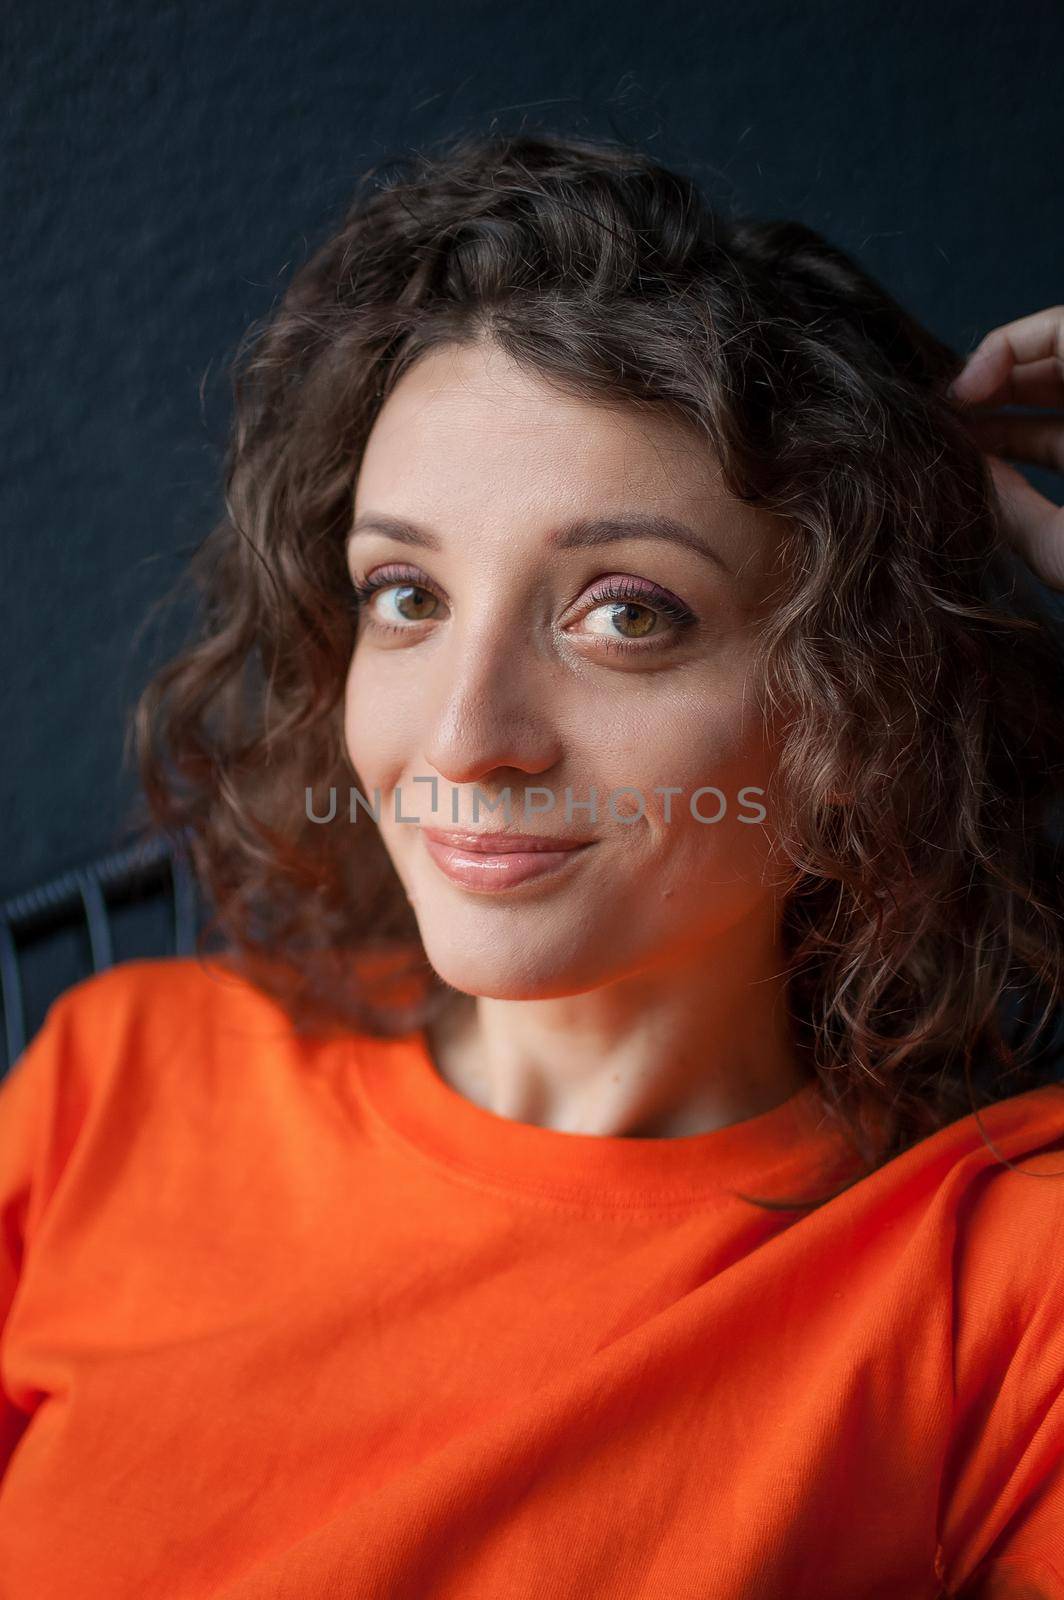 Female portrait of a beautiful curly girl in bright orange t-shirt at home in her apartment on dark background, happy people concept by balinska_lv